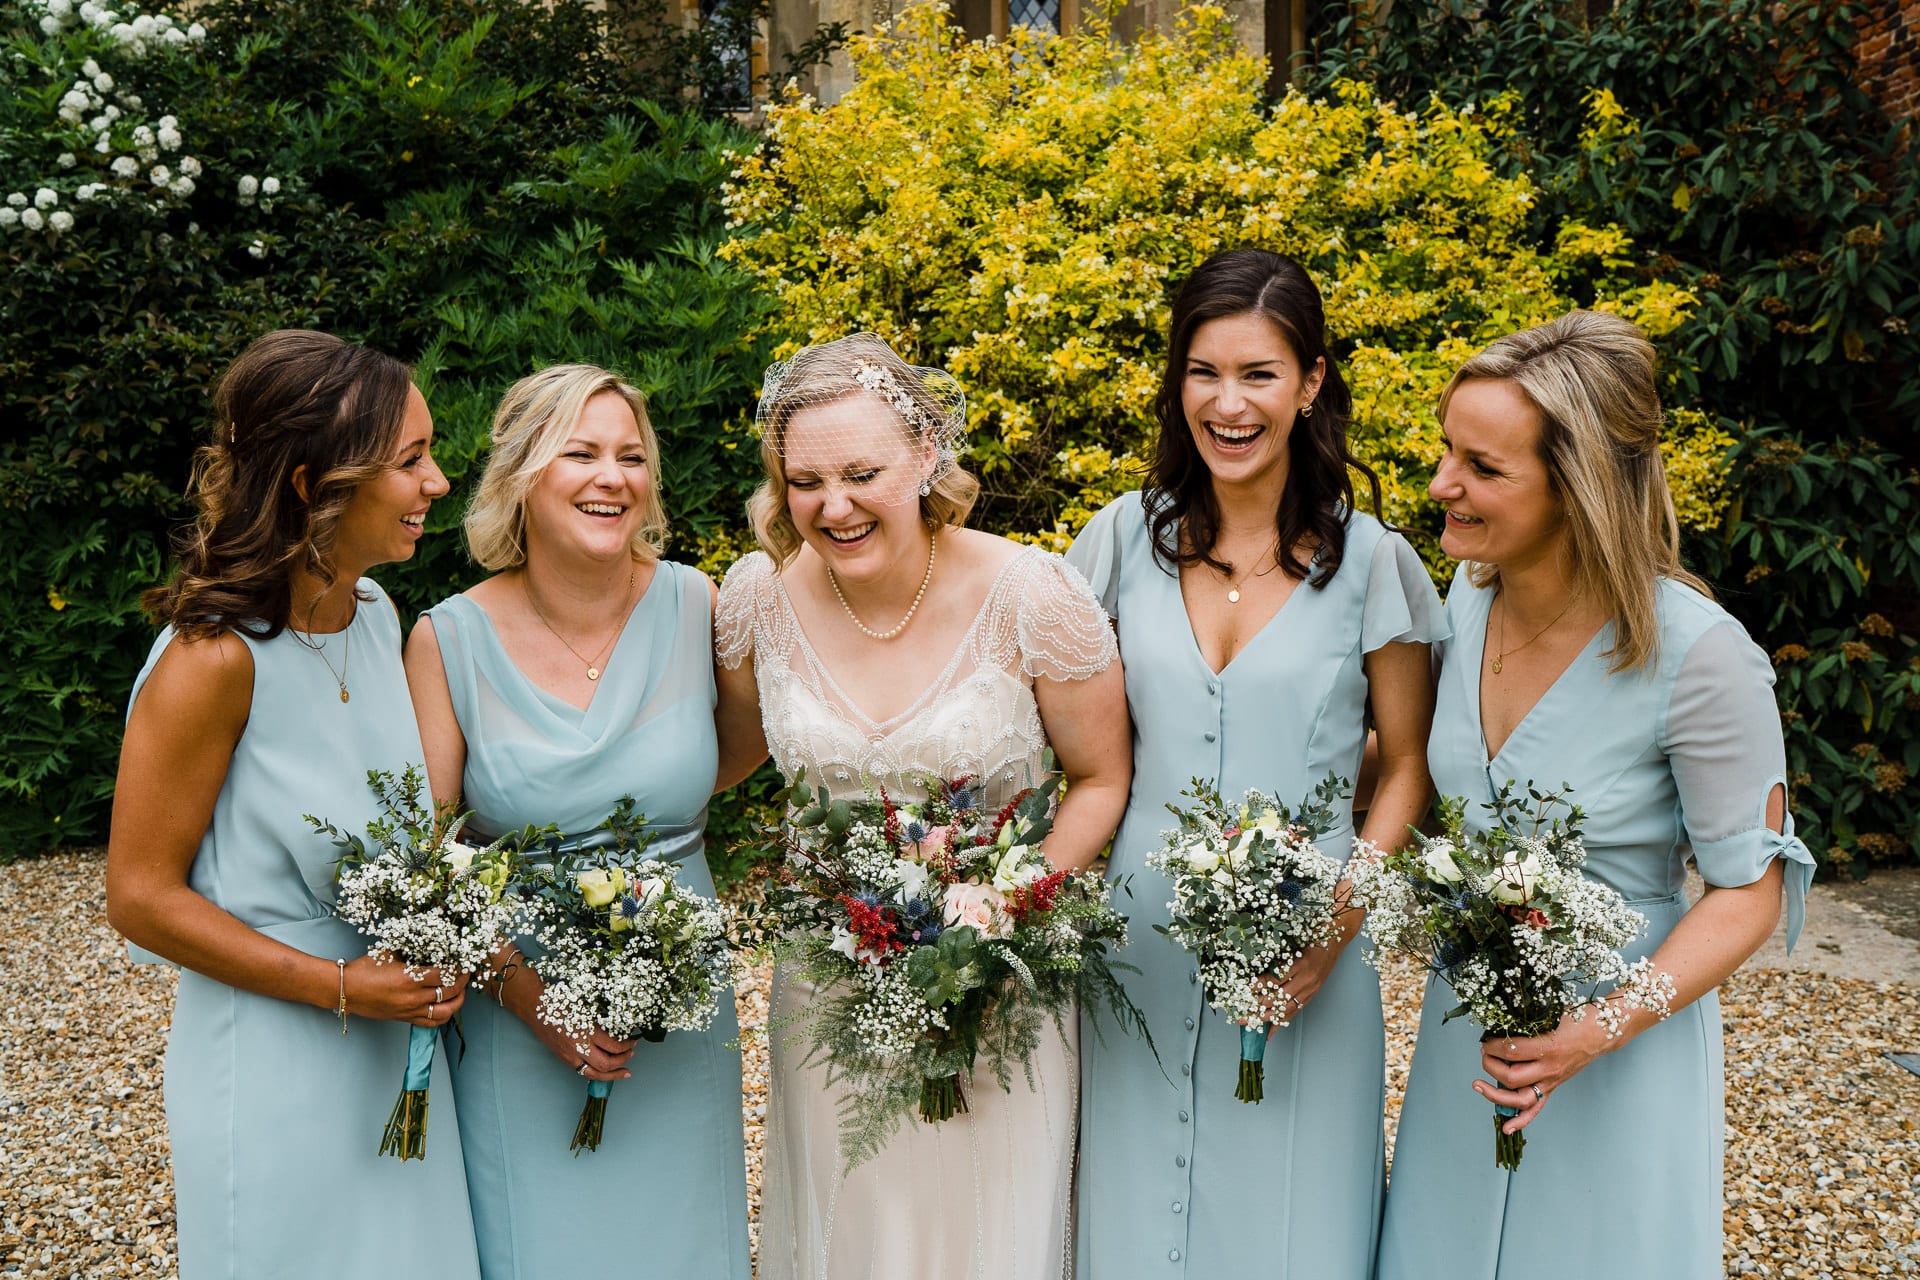 Variety of pale blue bridesmaid dresses